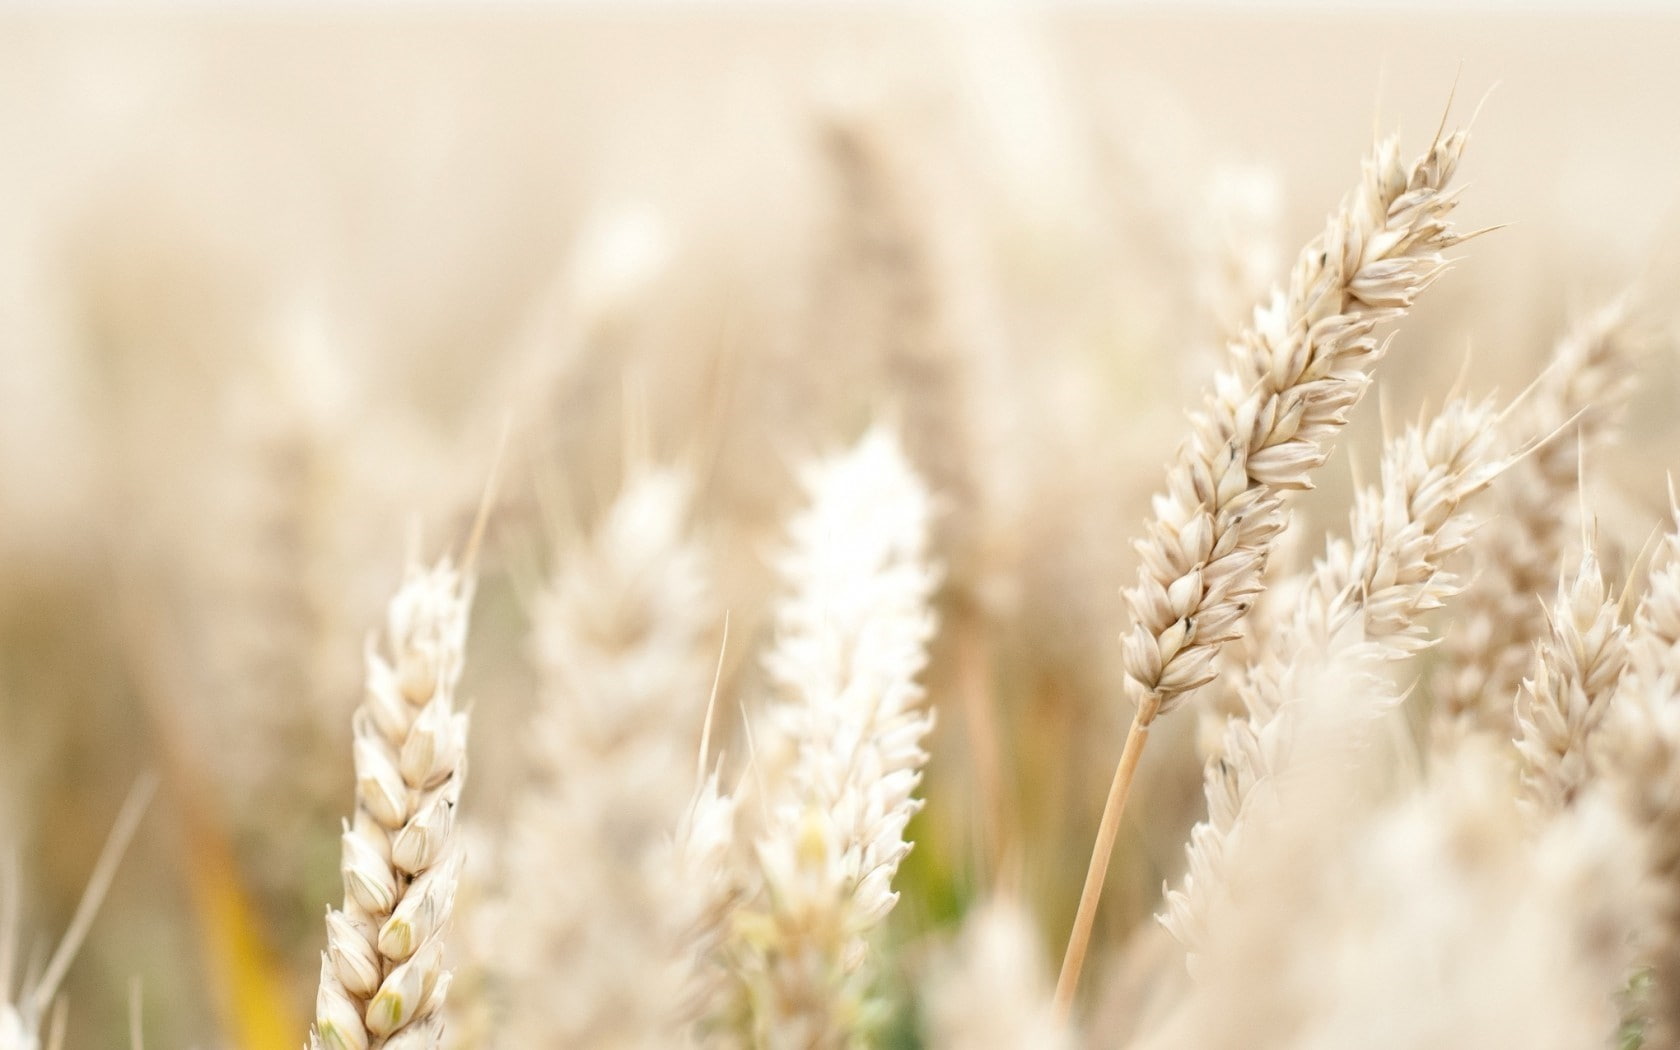 Rye, plants, crop, cereal plant, agriculture, wheat, rural scene